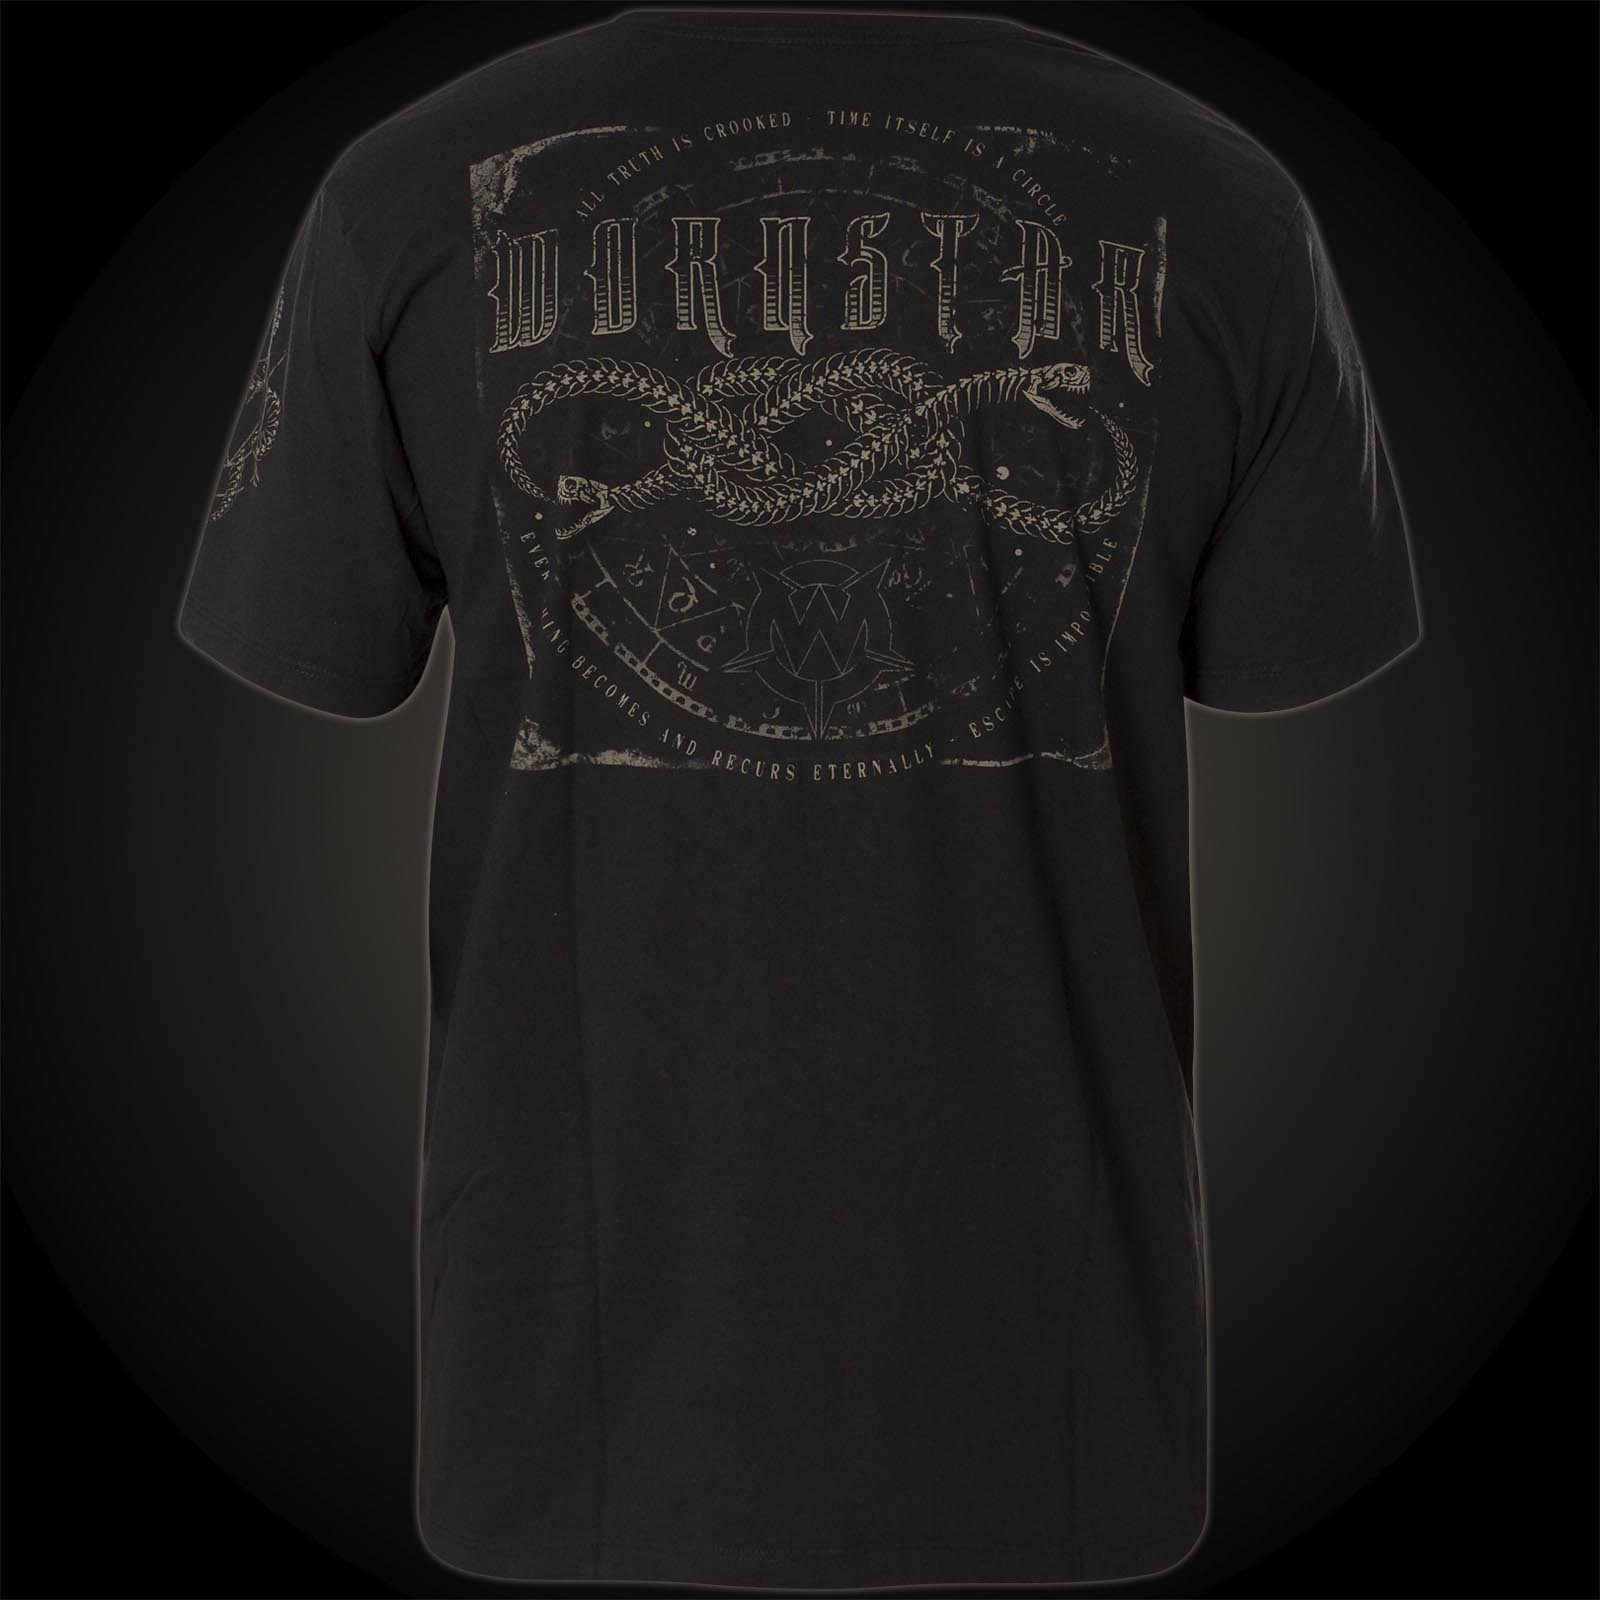 Wornstar T-Shirt Ouroboros in black with mineral wash.